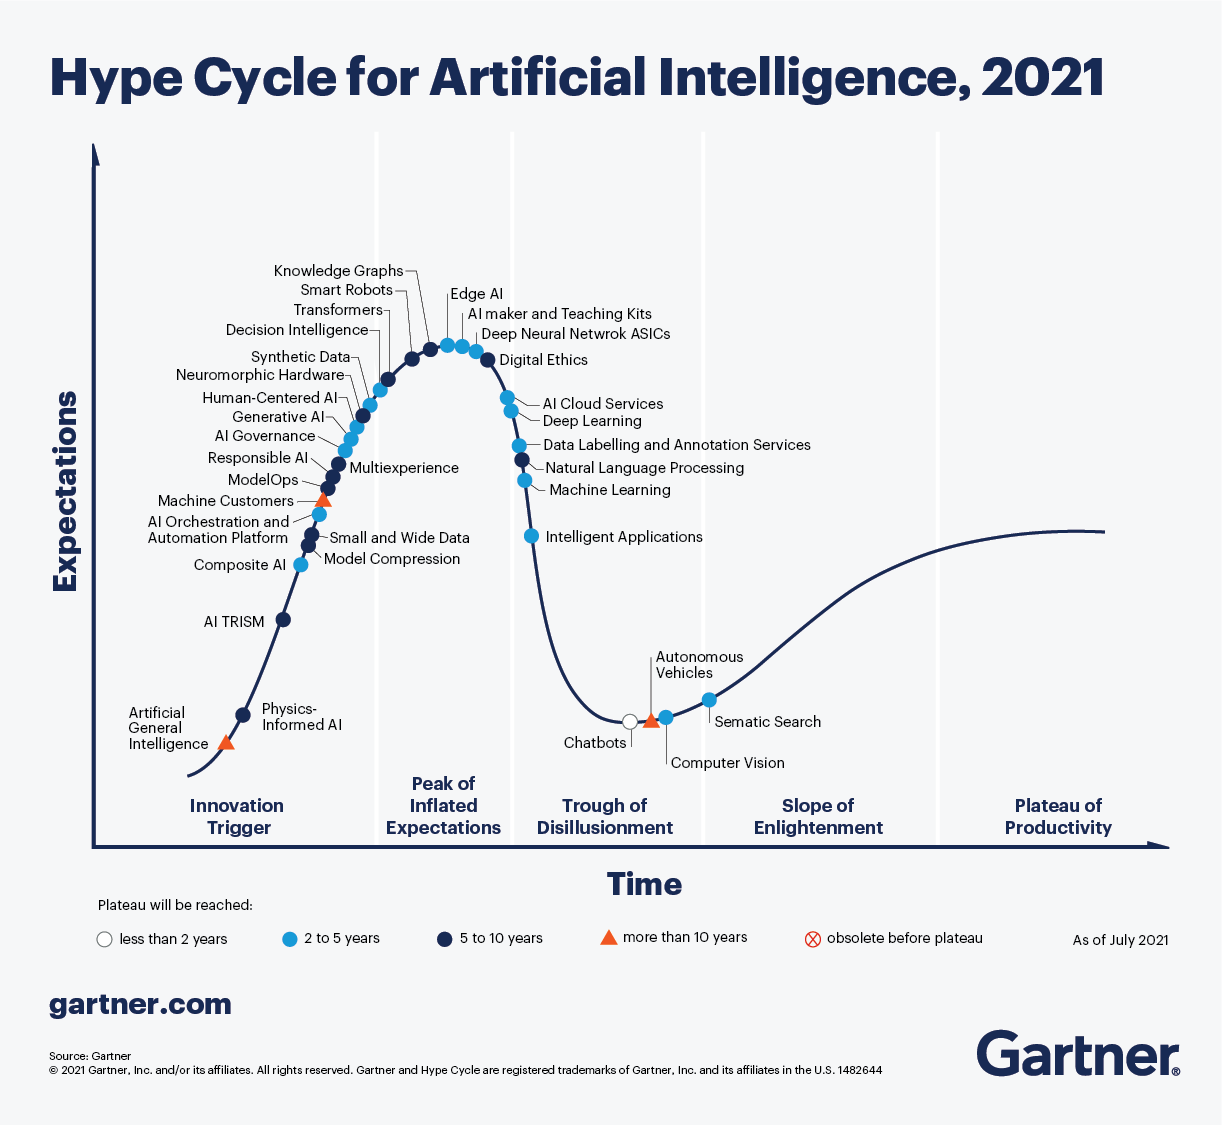 swg-hype-cycle-for-artficial-intelligence-2021